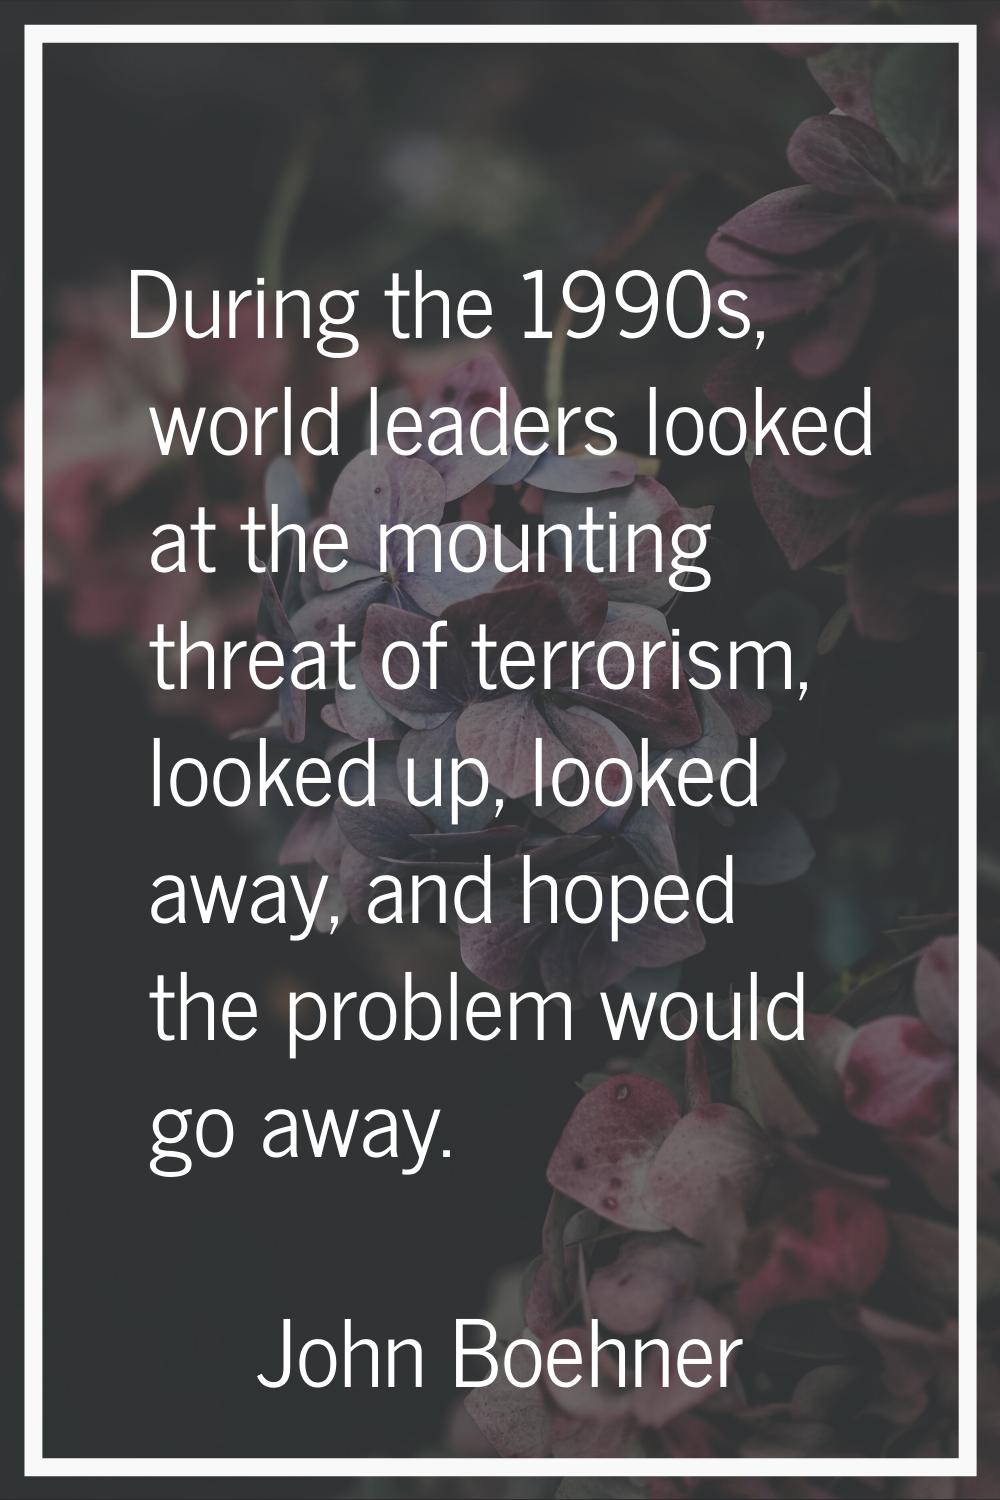 During the 1990s, world leaders looked at the mounting threat of terrorism, looked up, looked away,